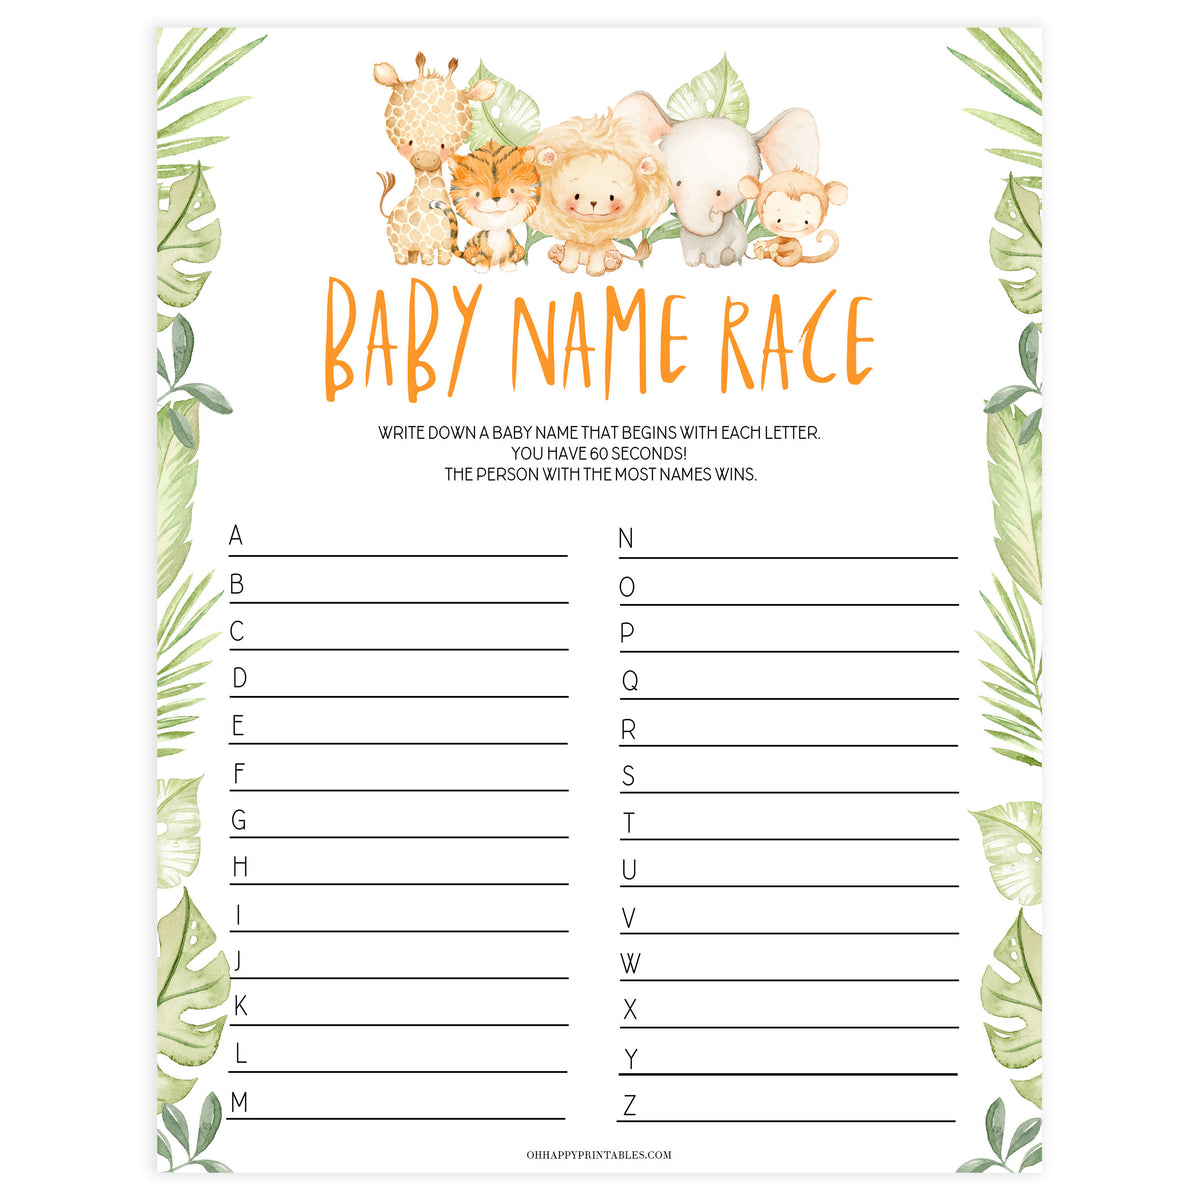 baby name race game, Printable baby shower games, safari animals baby games, baby shower games, fun baby shower ideas, top baby shower ideas, safari animals baby shower, baby shower games, fun baby shower ideas